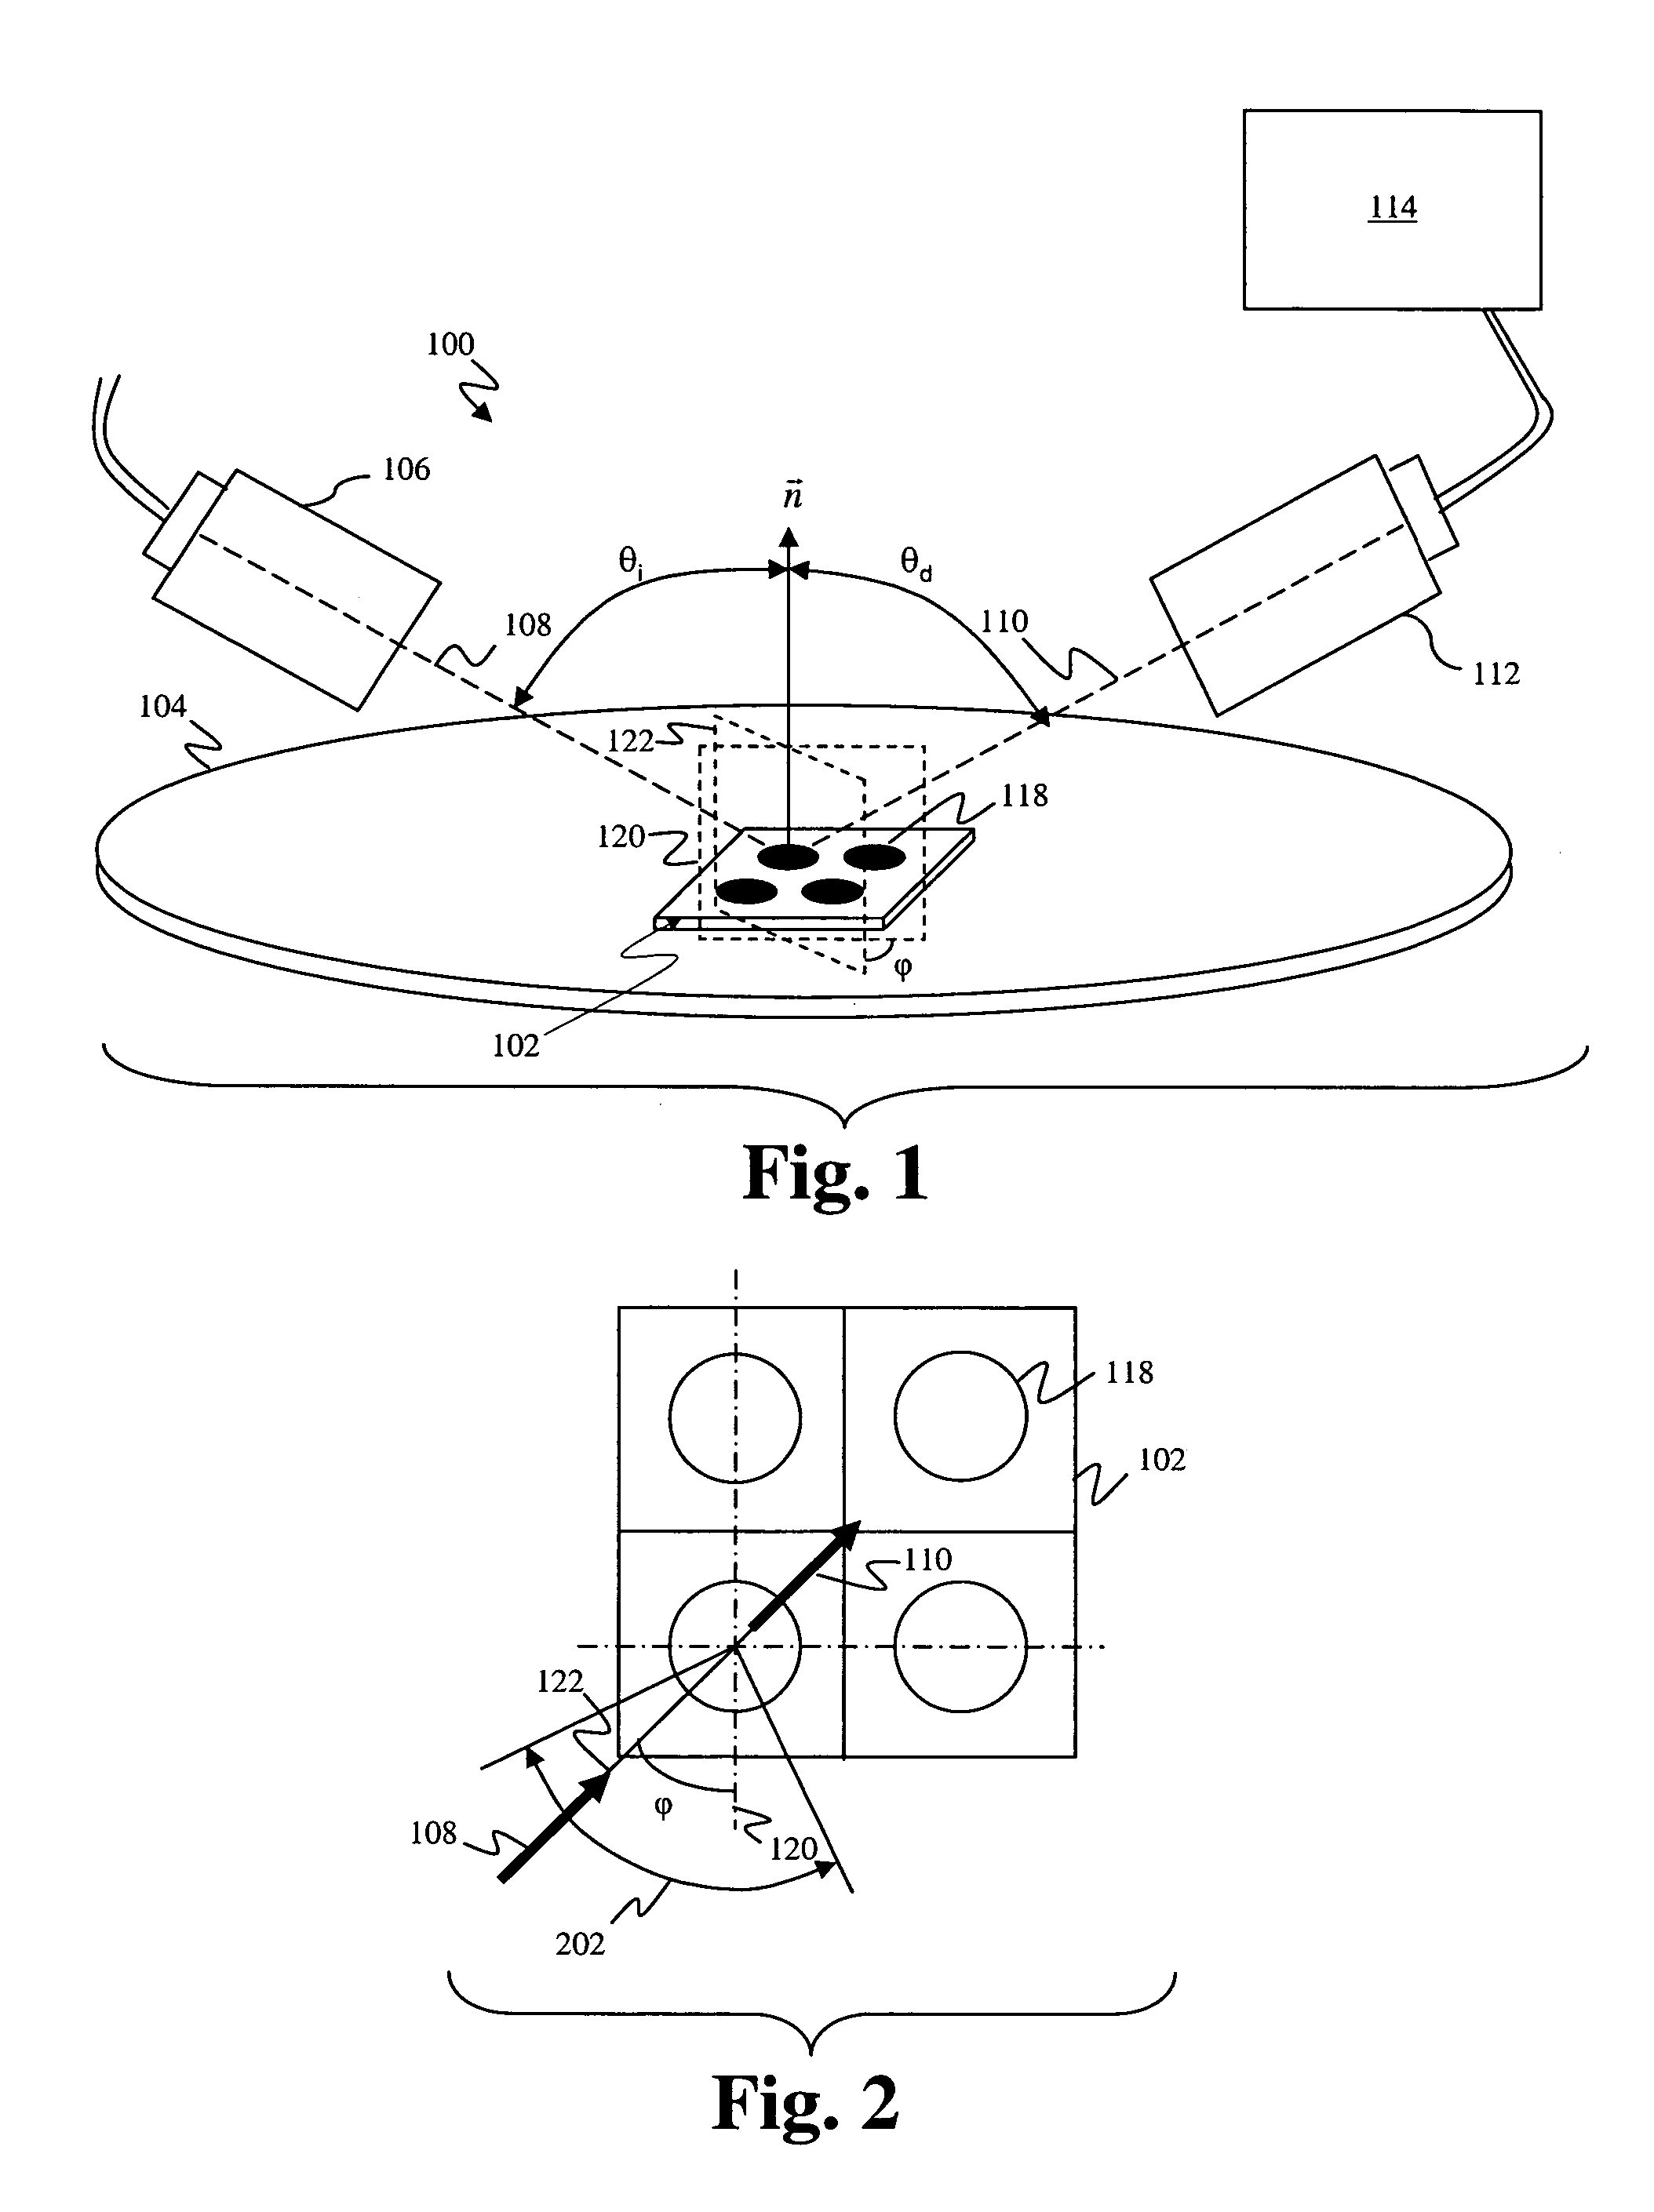 Azimuthal scanning of a structure formed on a semiconductor wafer